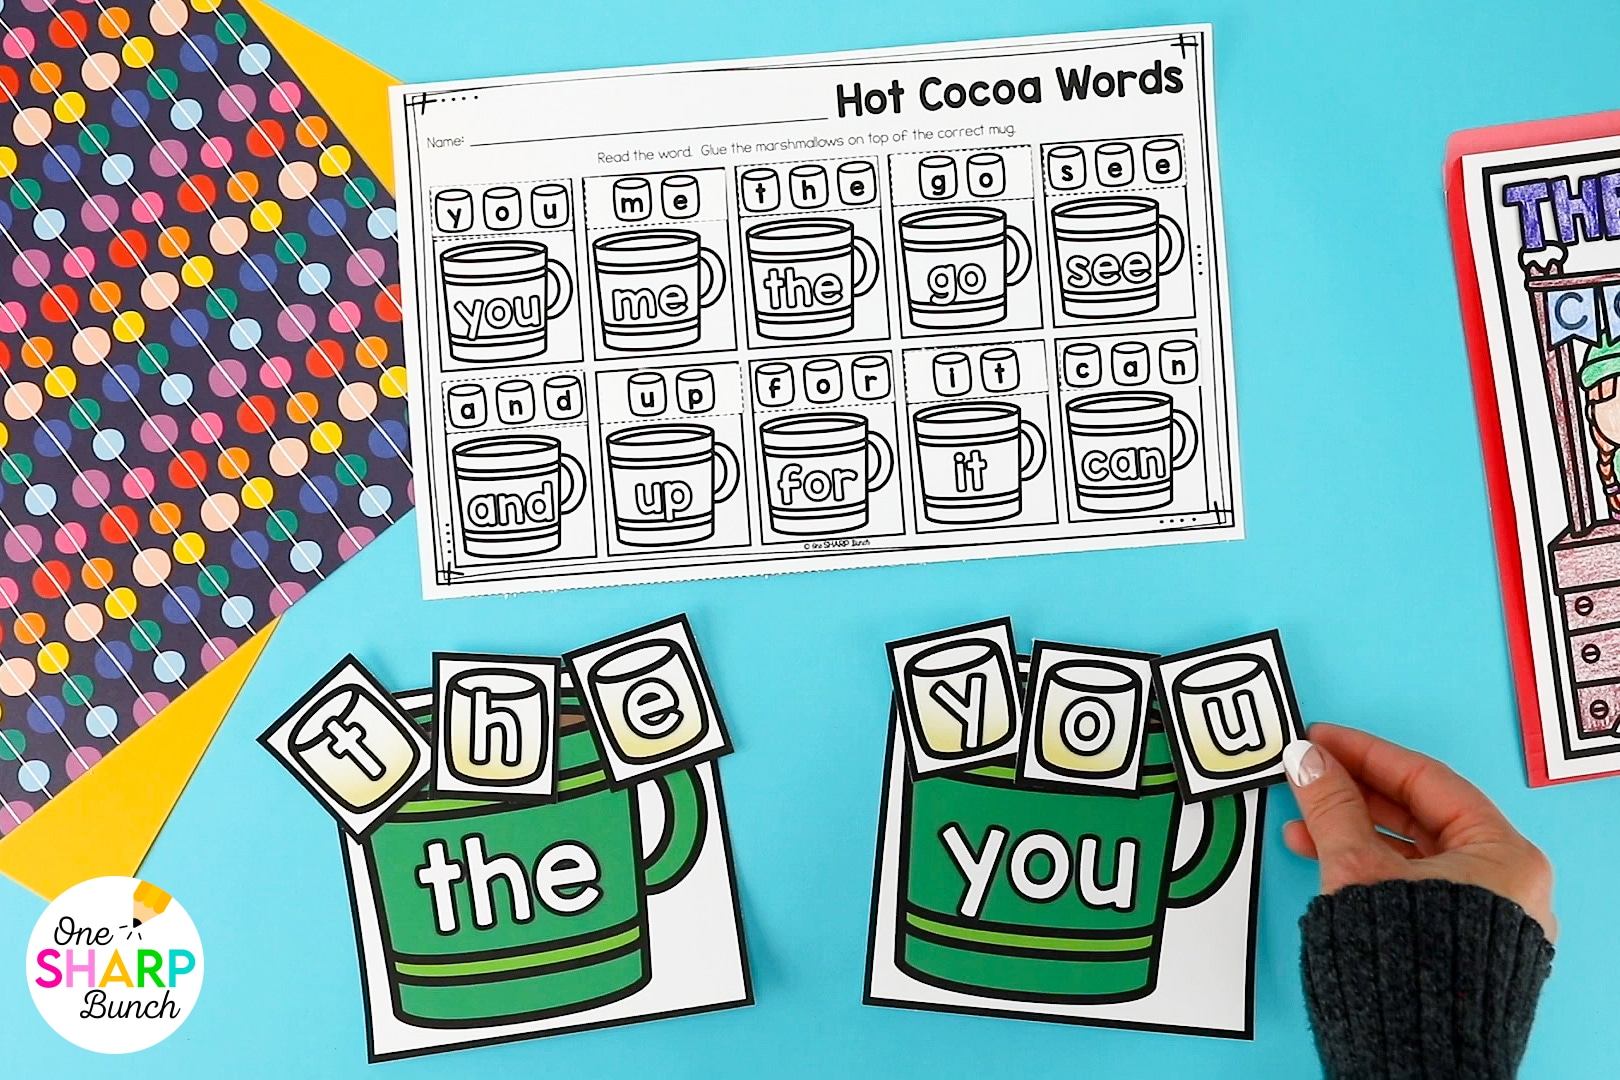 Discover who stole the hot cocoa, as you review math and literacy skills, with these hot chocolate party winter centers and winter escape room! This Christmas escape room is perfect for a classroom hot chocolate party, classroom Christmas party, or Christmas centers for preschool, kindergarten, or first grade. Students practice rhyming words, CVC words, decomposing numbers & more with these winter literacy centers and winter math centers. Gear up for winter with these winter activities for kids!